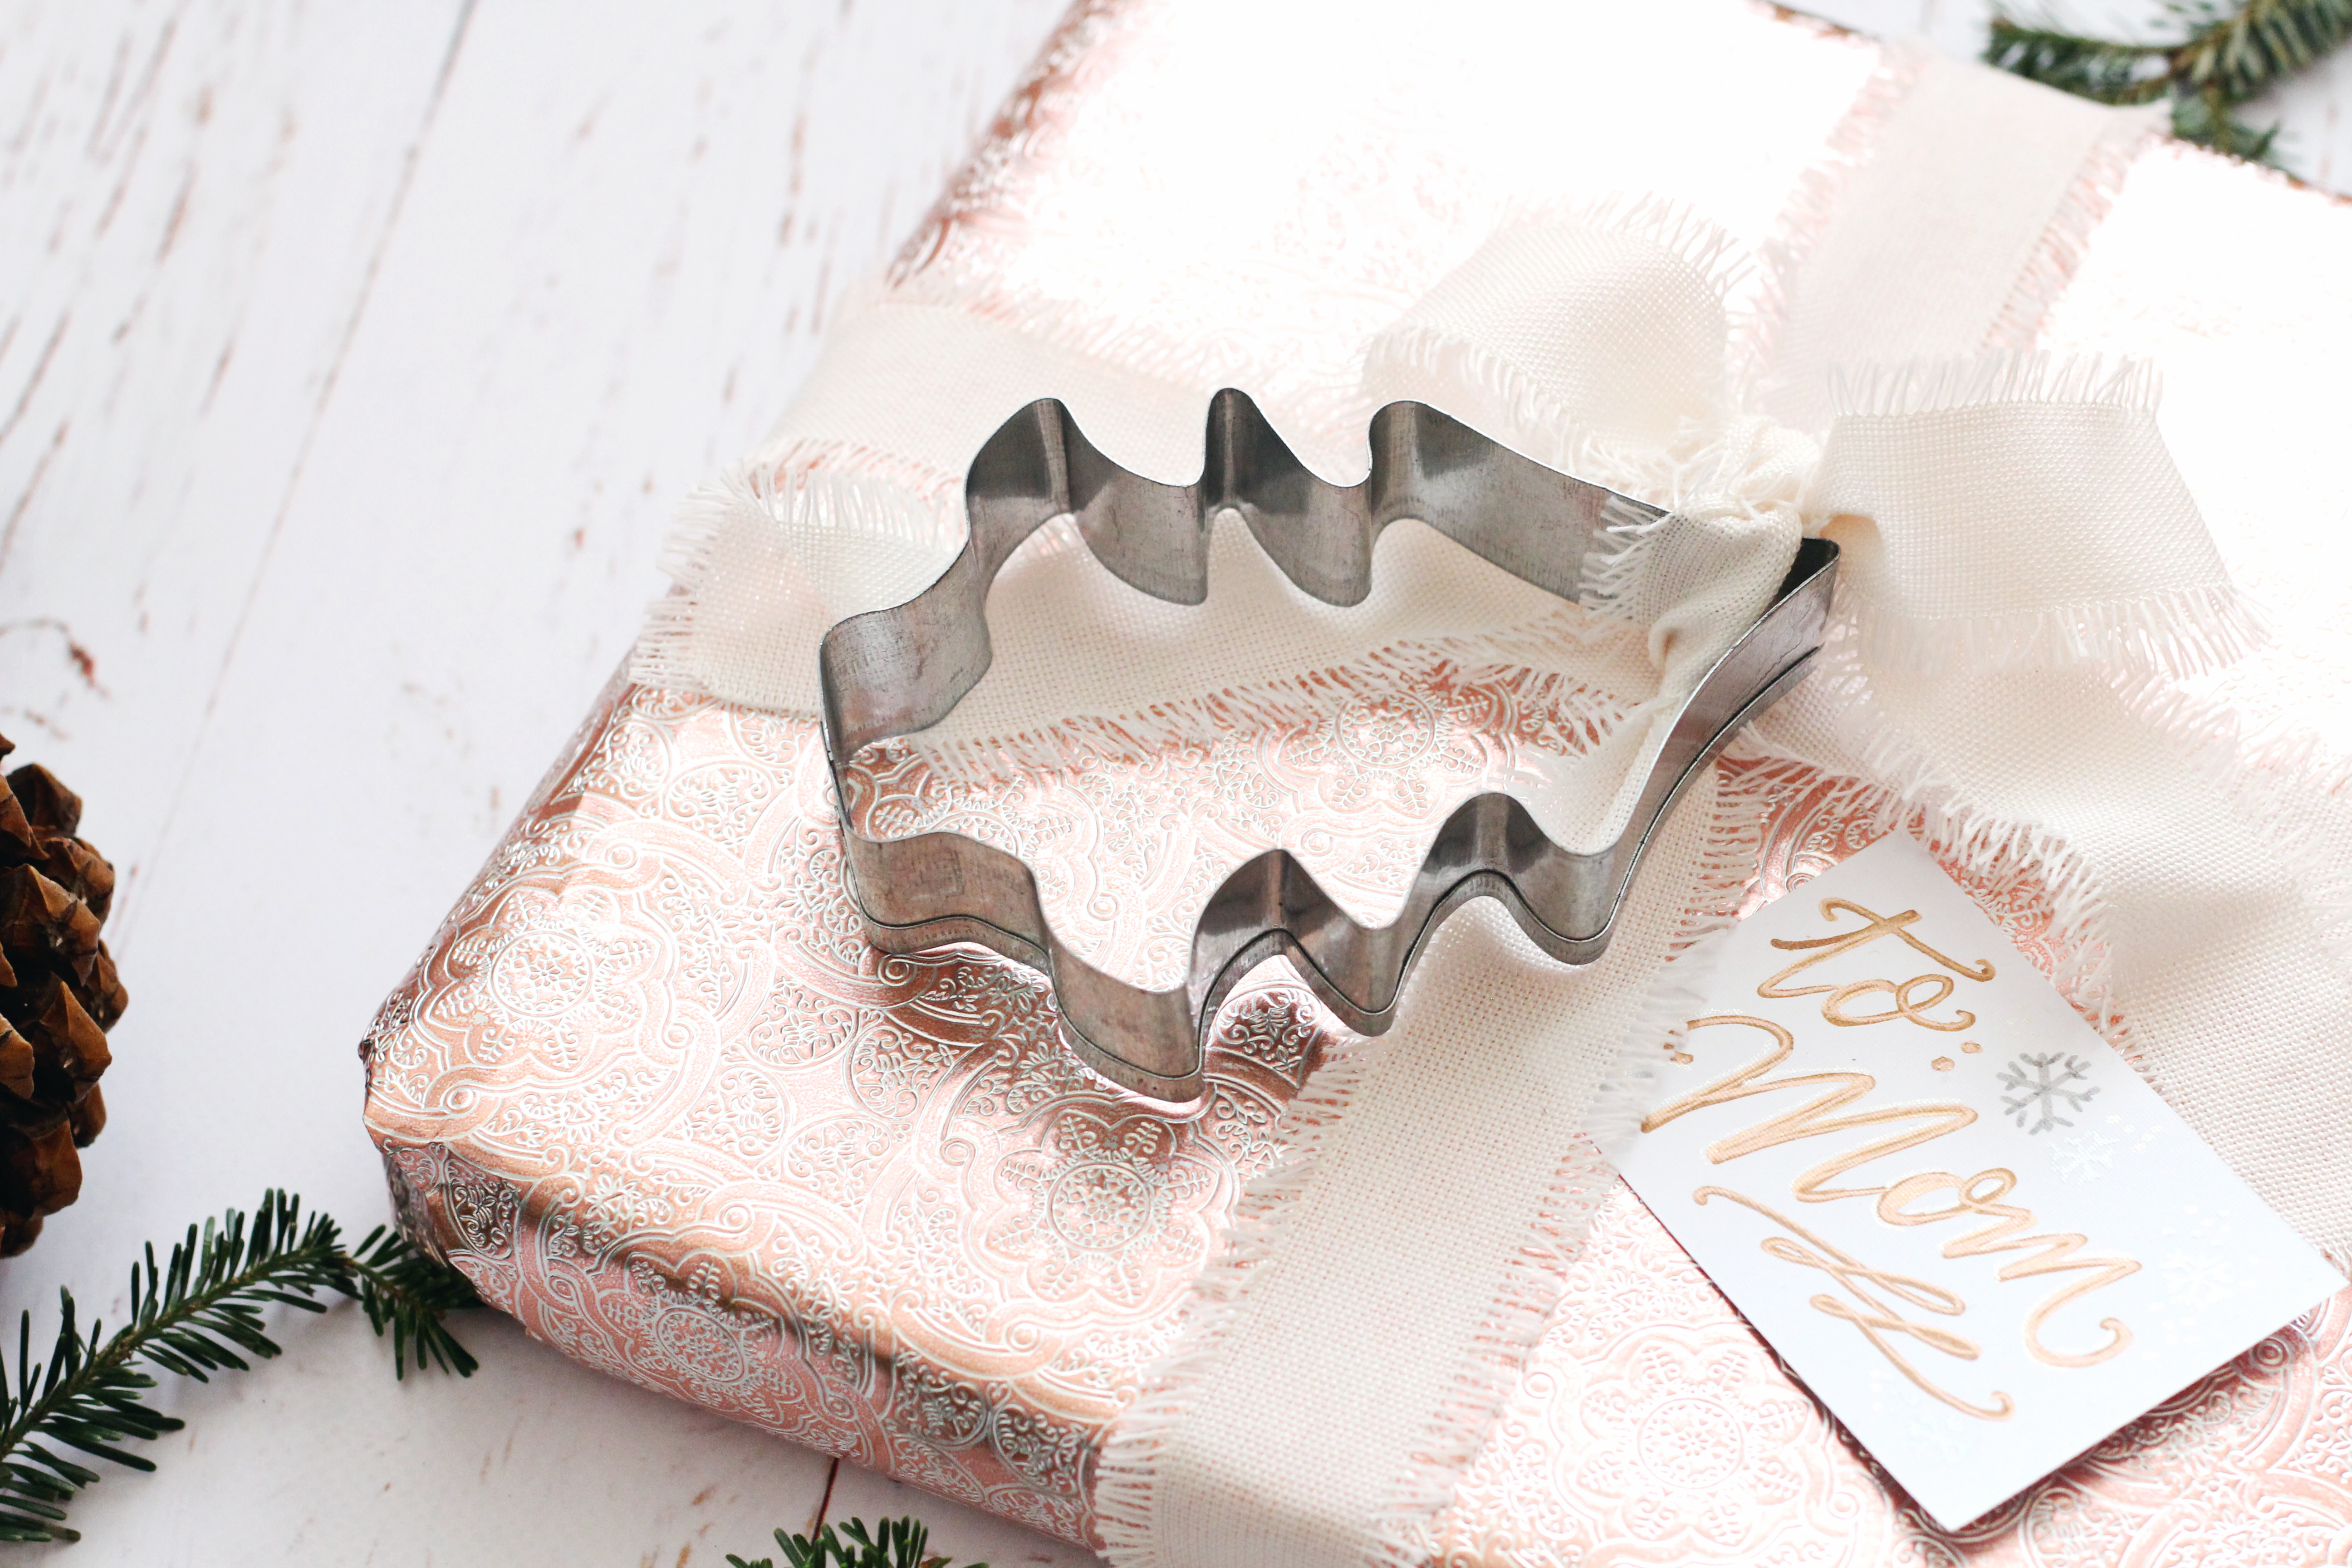 Use a Christmas cookie cutter as a cute gift wrap embellishment